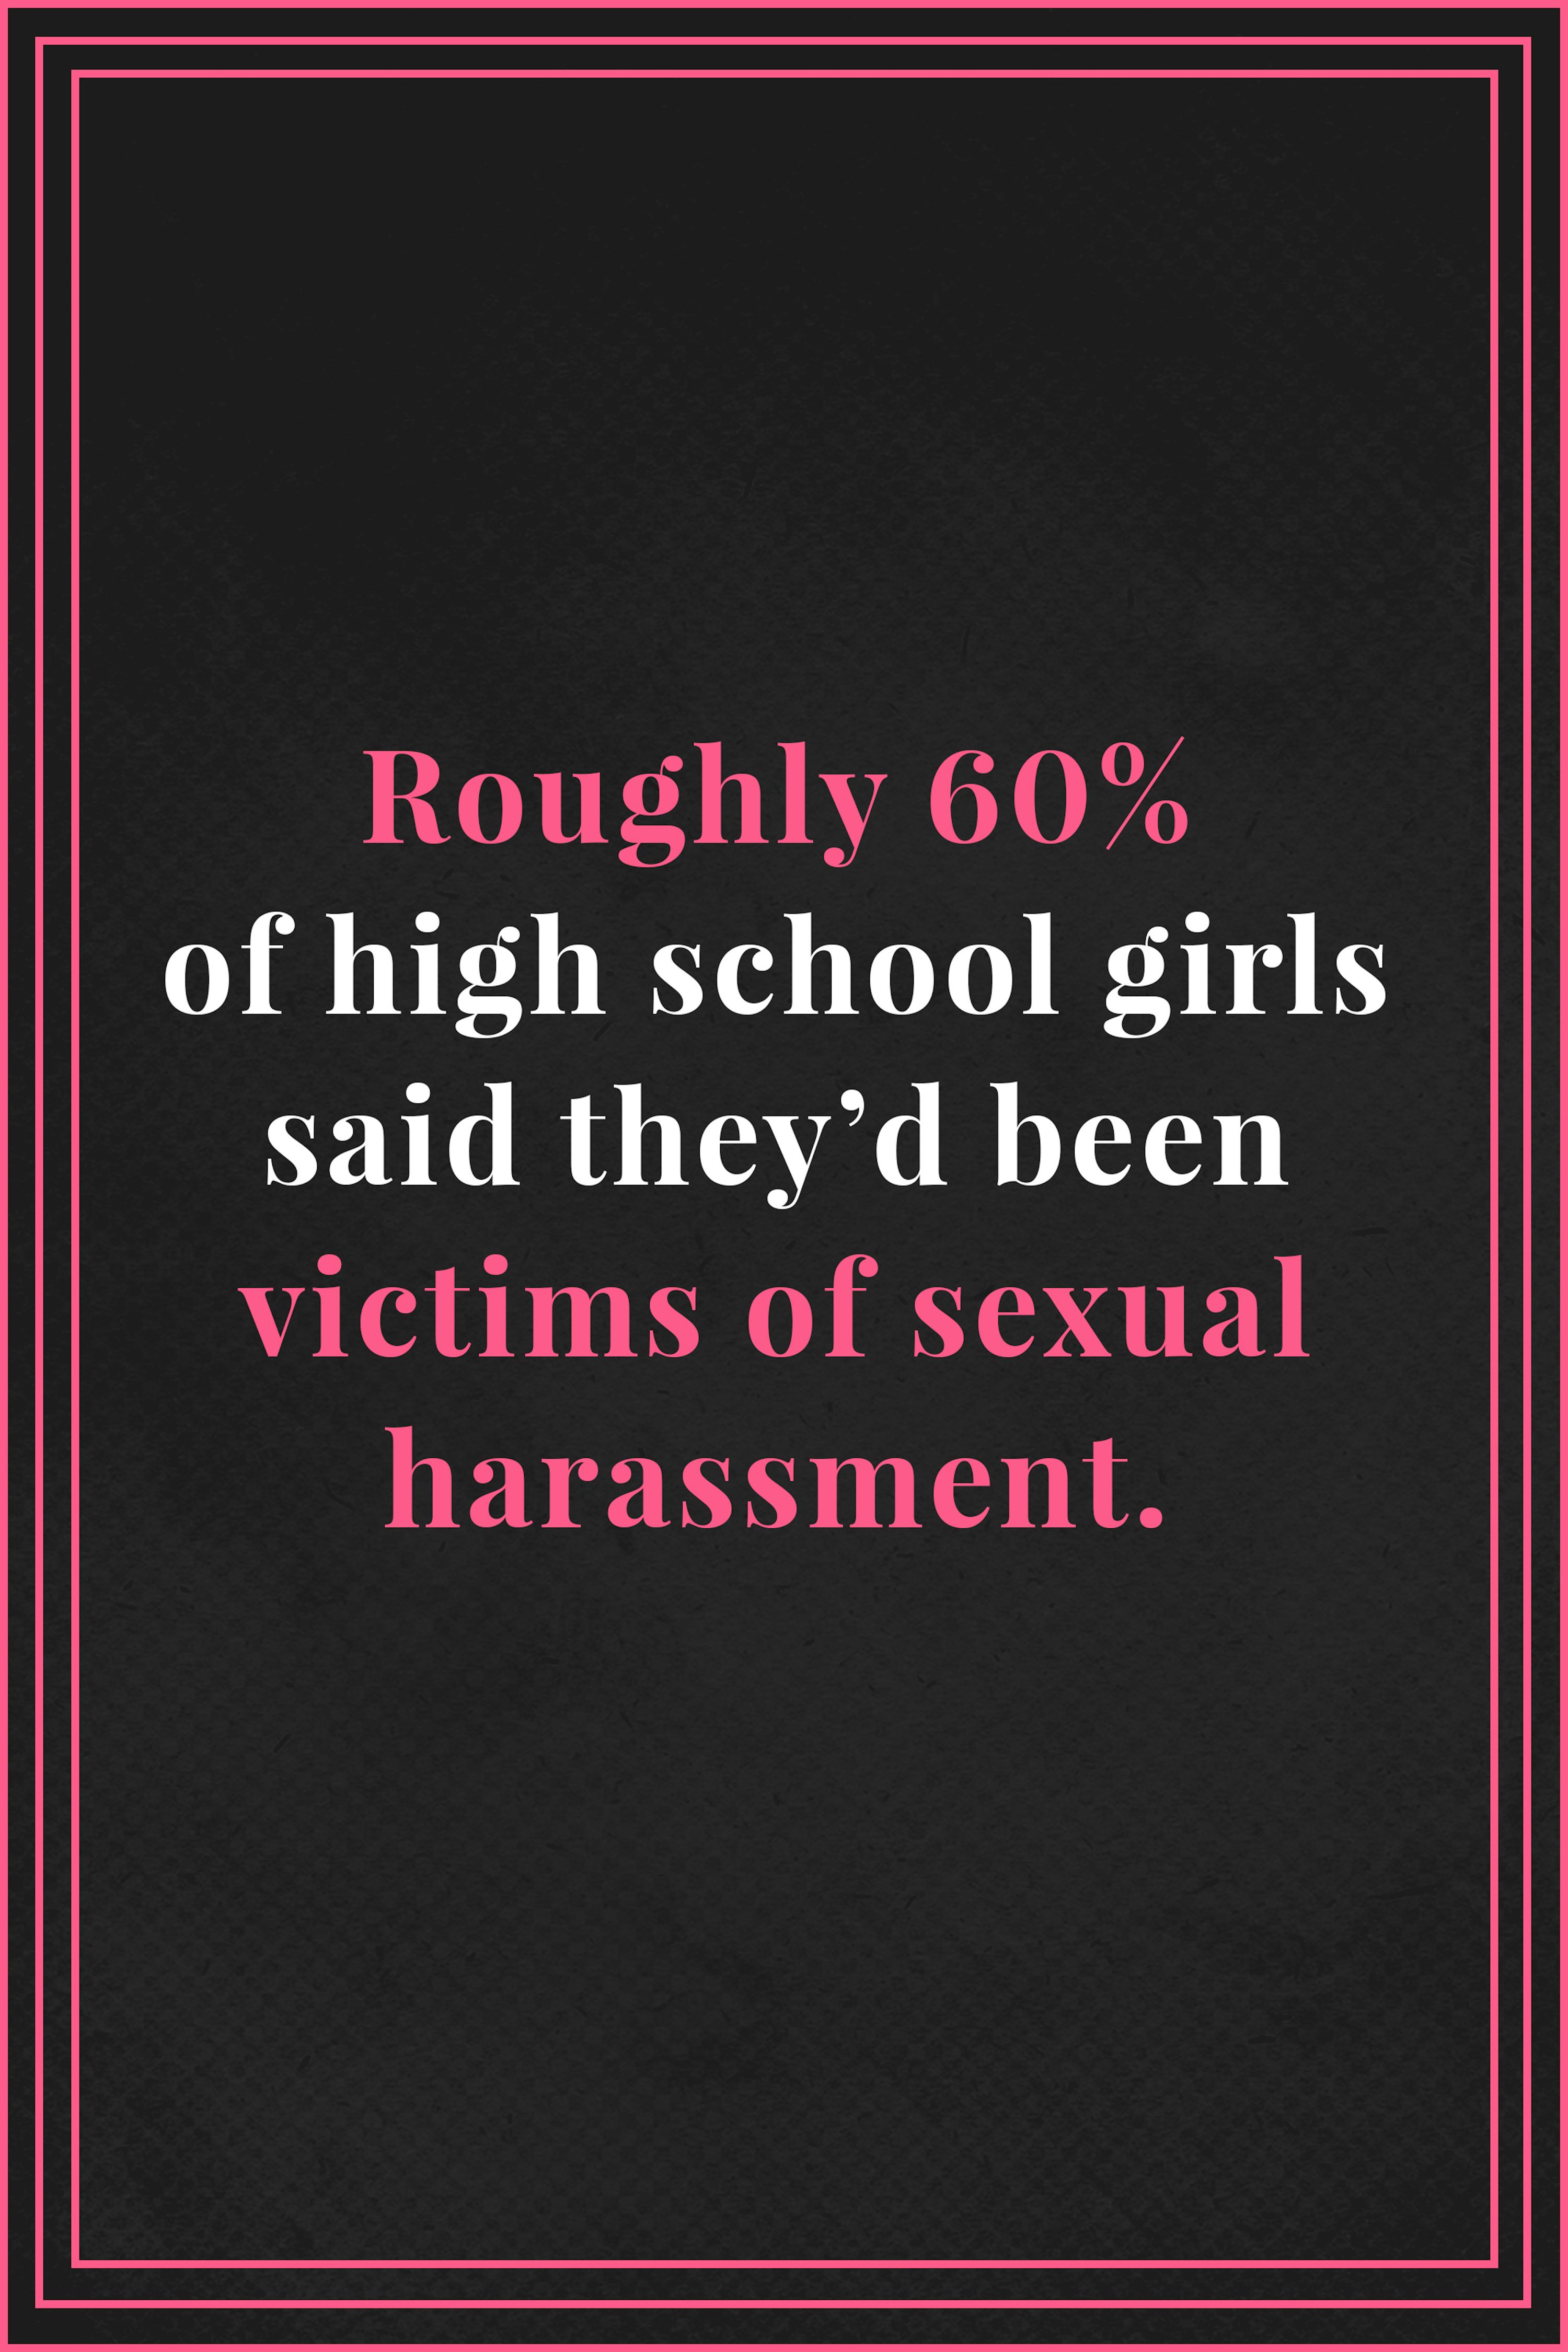 School Girl Hd Xxx Rep Video - Sexual Harassment in School - Real Girls Share Experiences Of Sexual  Assault in School